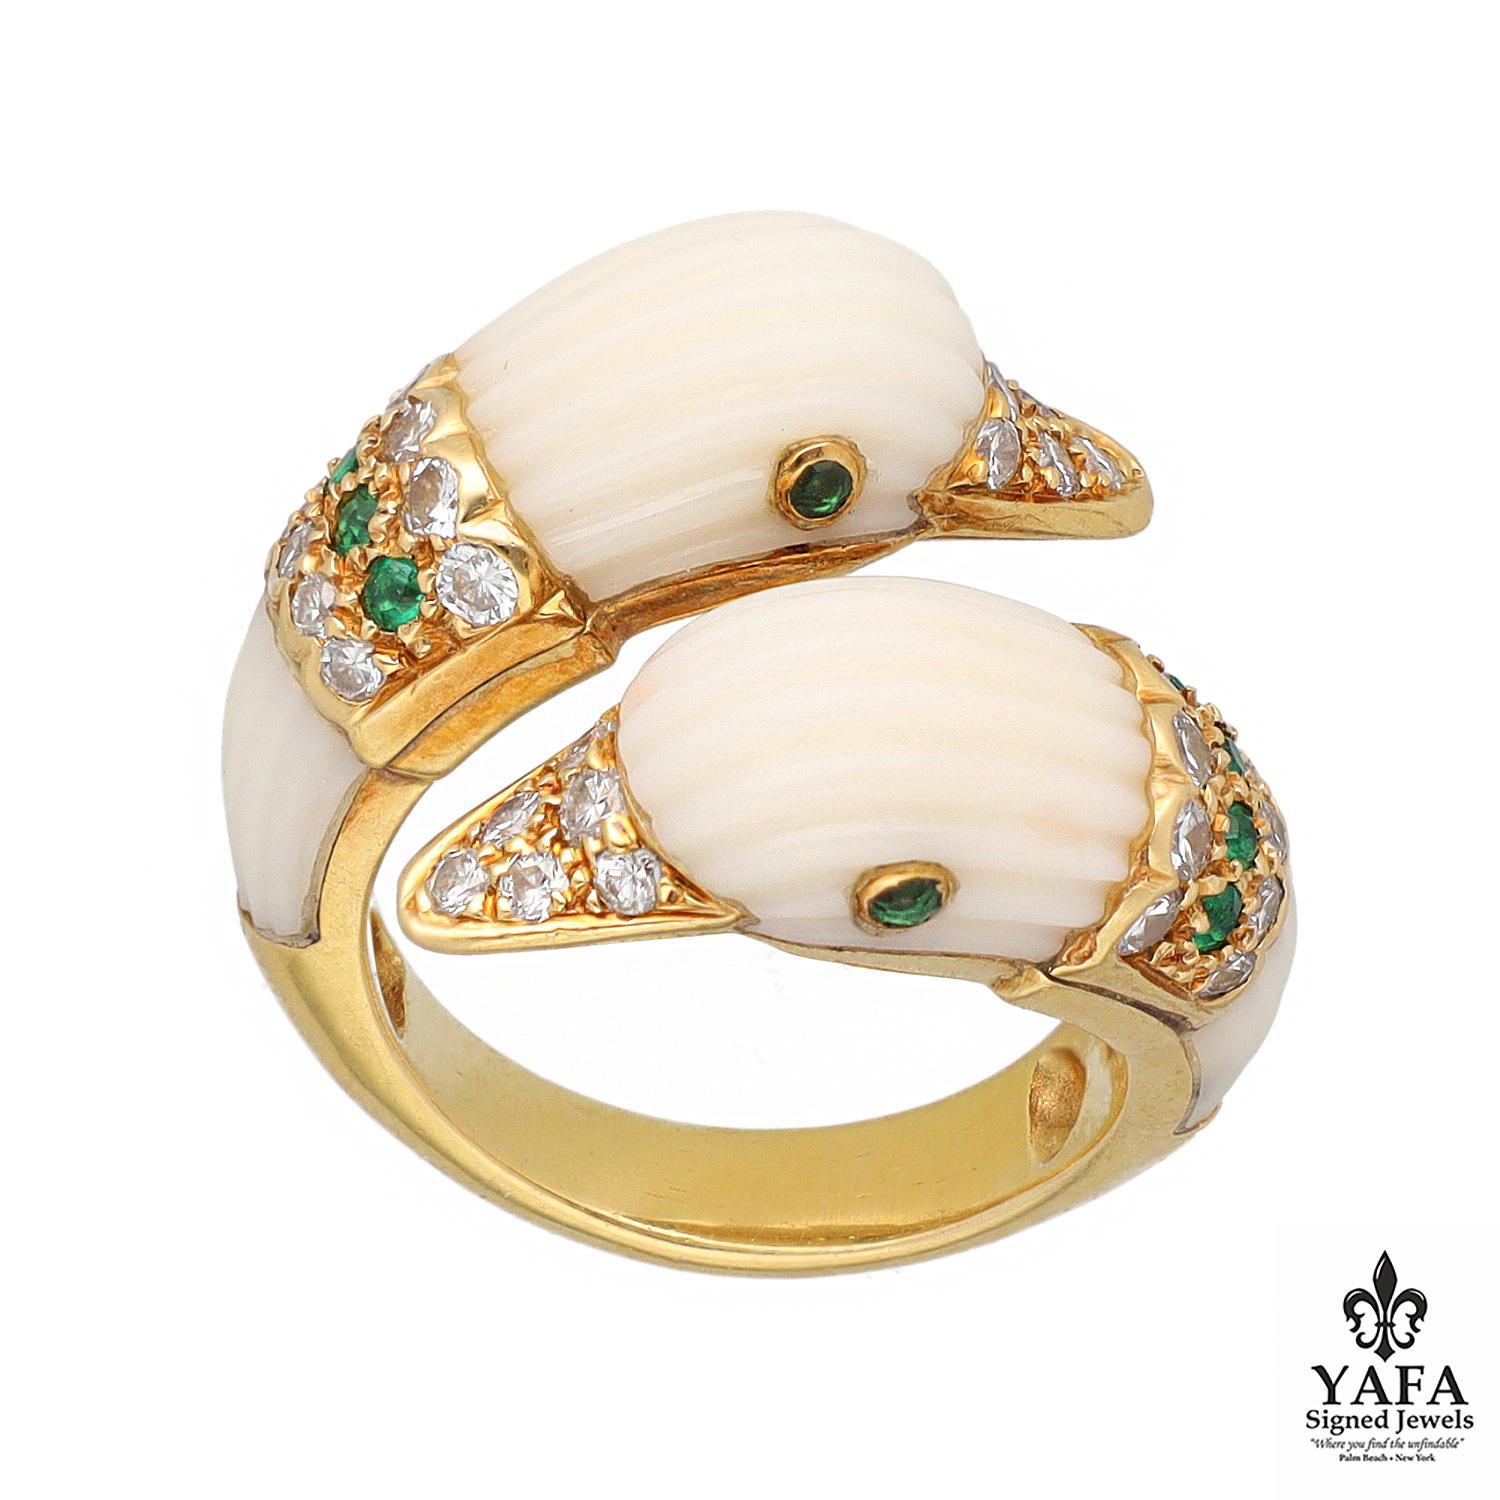 Designed By a Bypass Ring of Stylized Double Head Fluted White Coral Duck Heads, set with Circular-Cut Diamond Beak and Emerald Eyes Accented with Diamond and Emerald Set Collars, Mounted in 18K Yellow Gold. Original Design Copyright by Van Cleef &